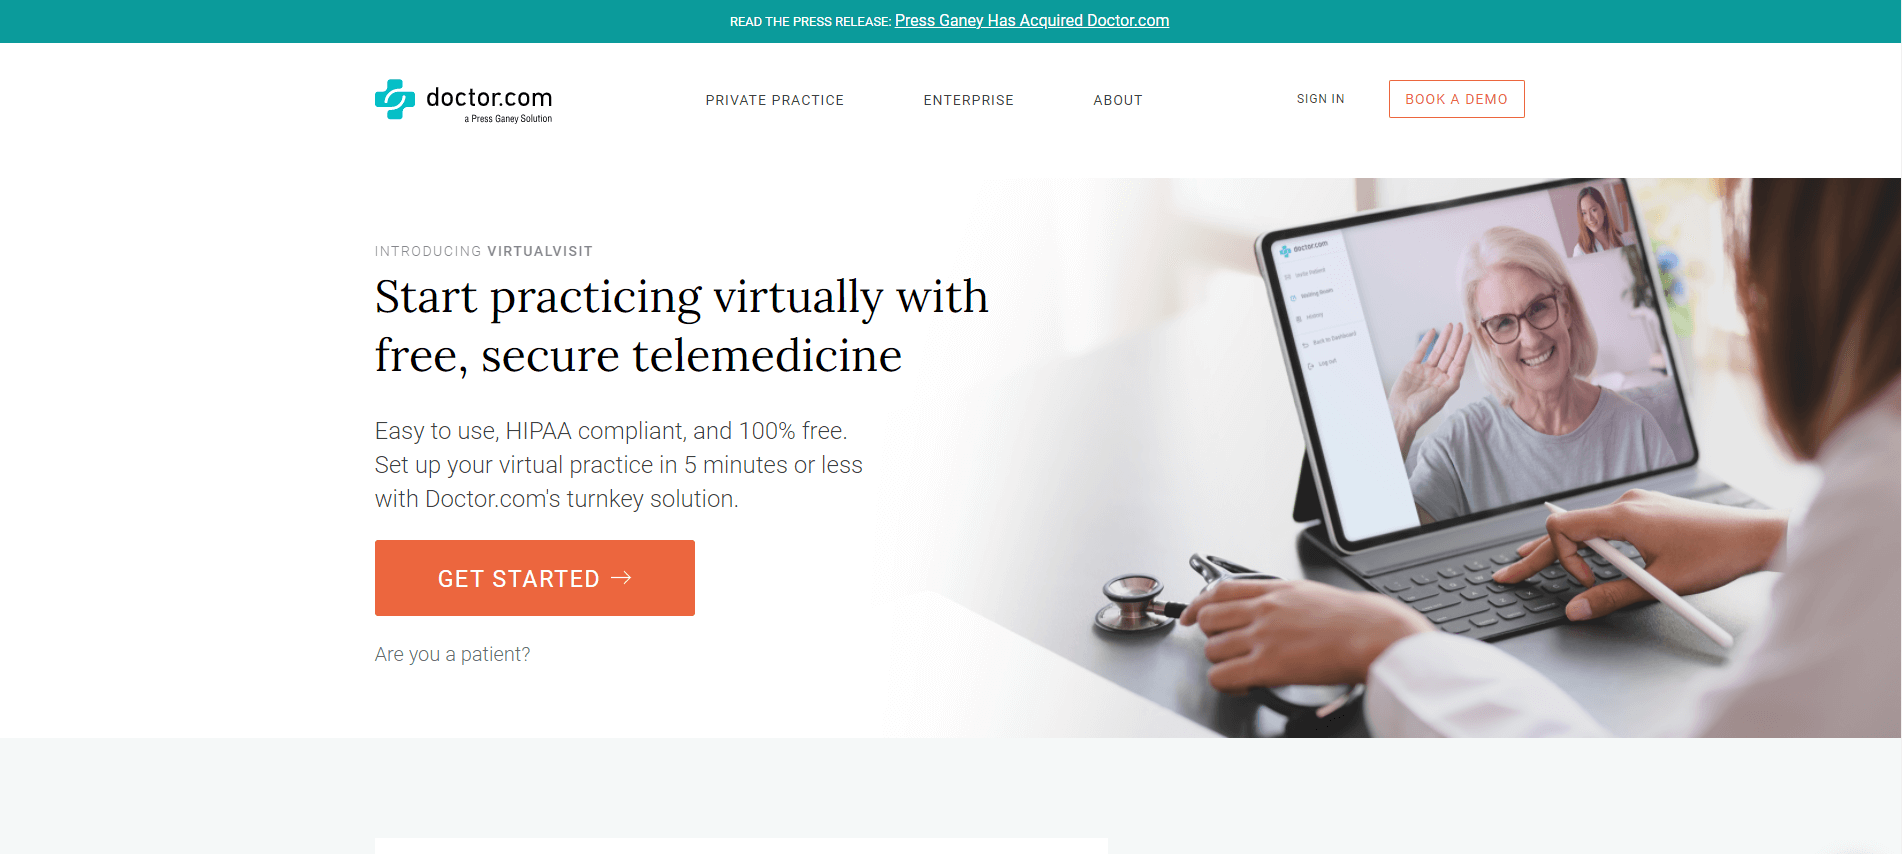 screenshot of the doctor.com home page